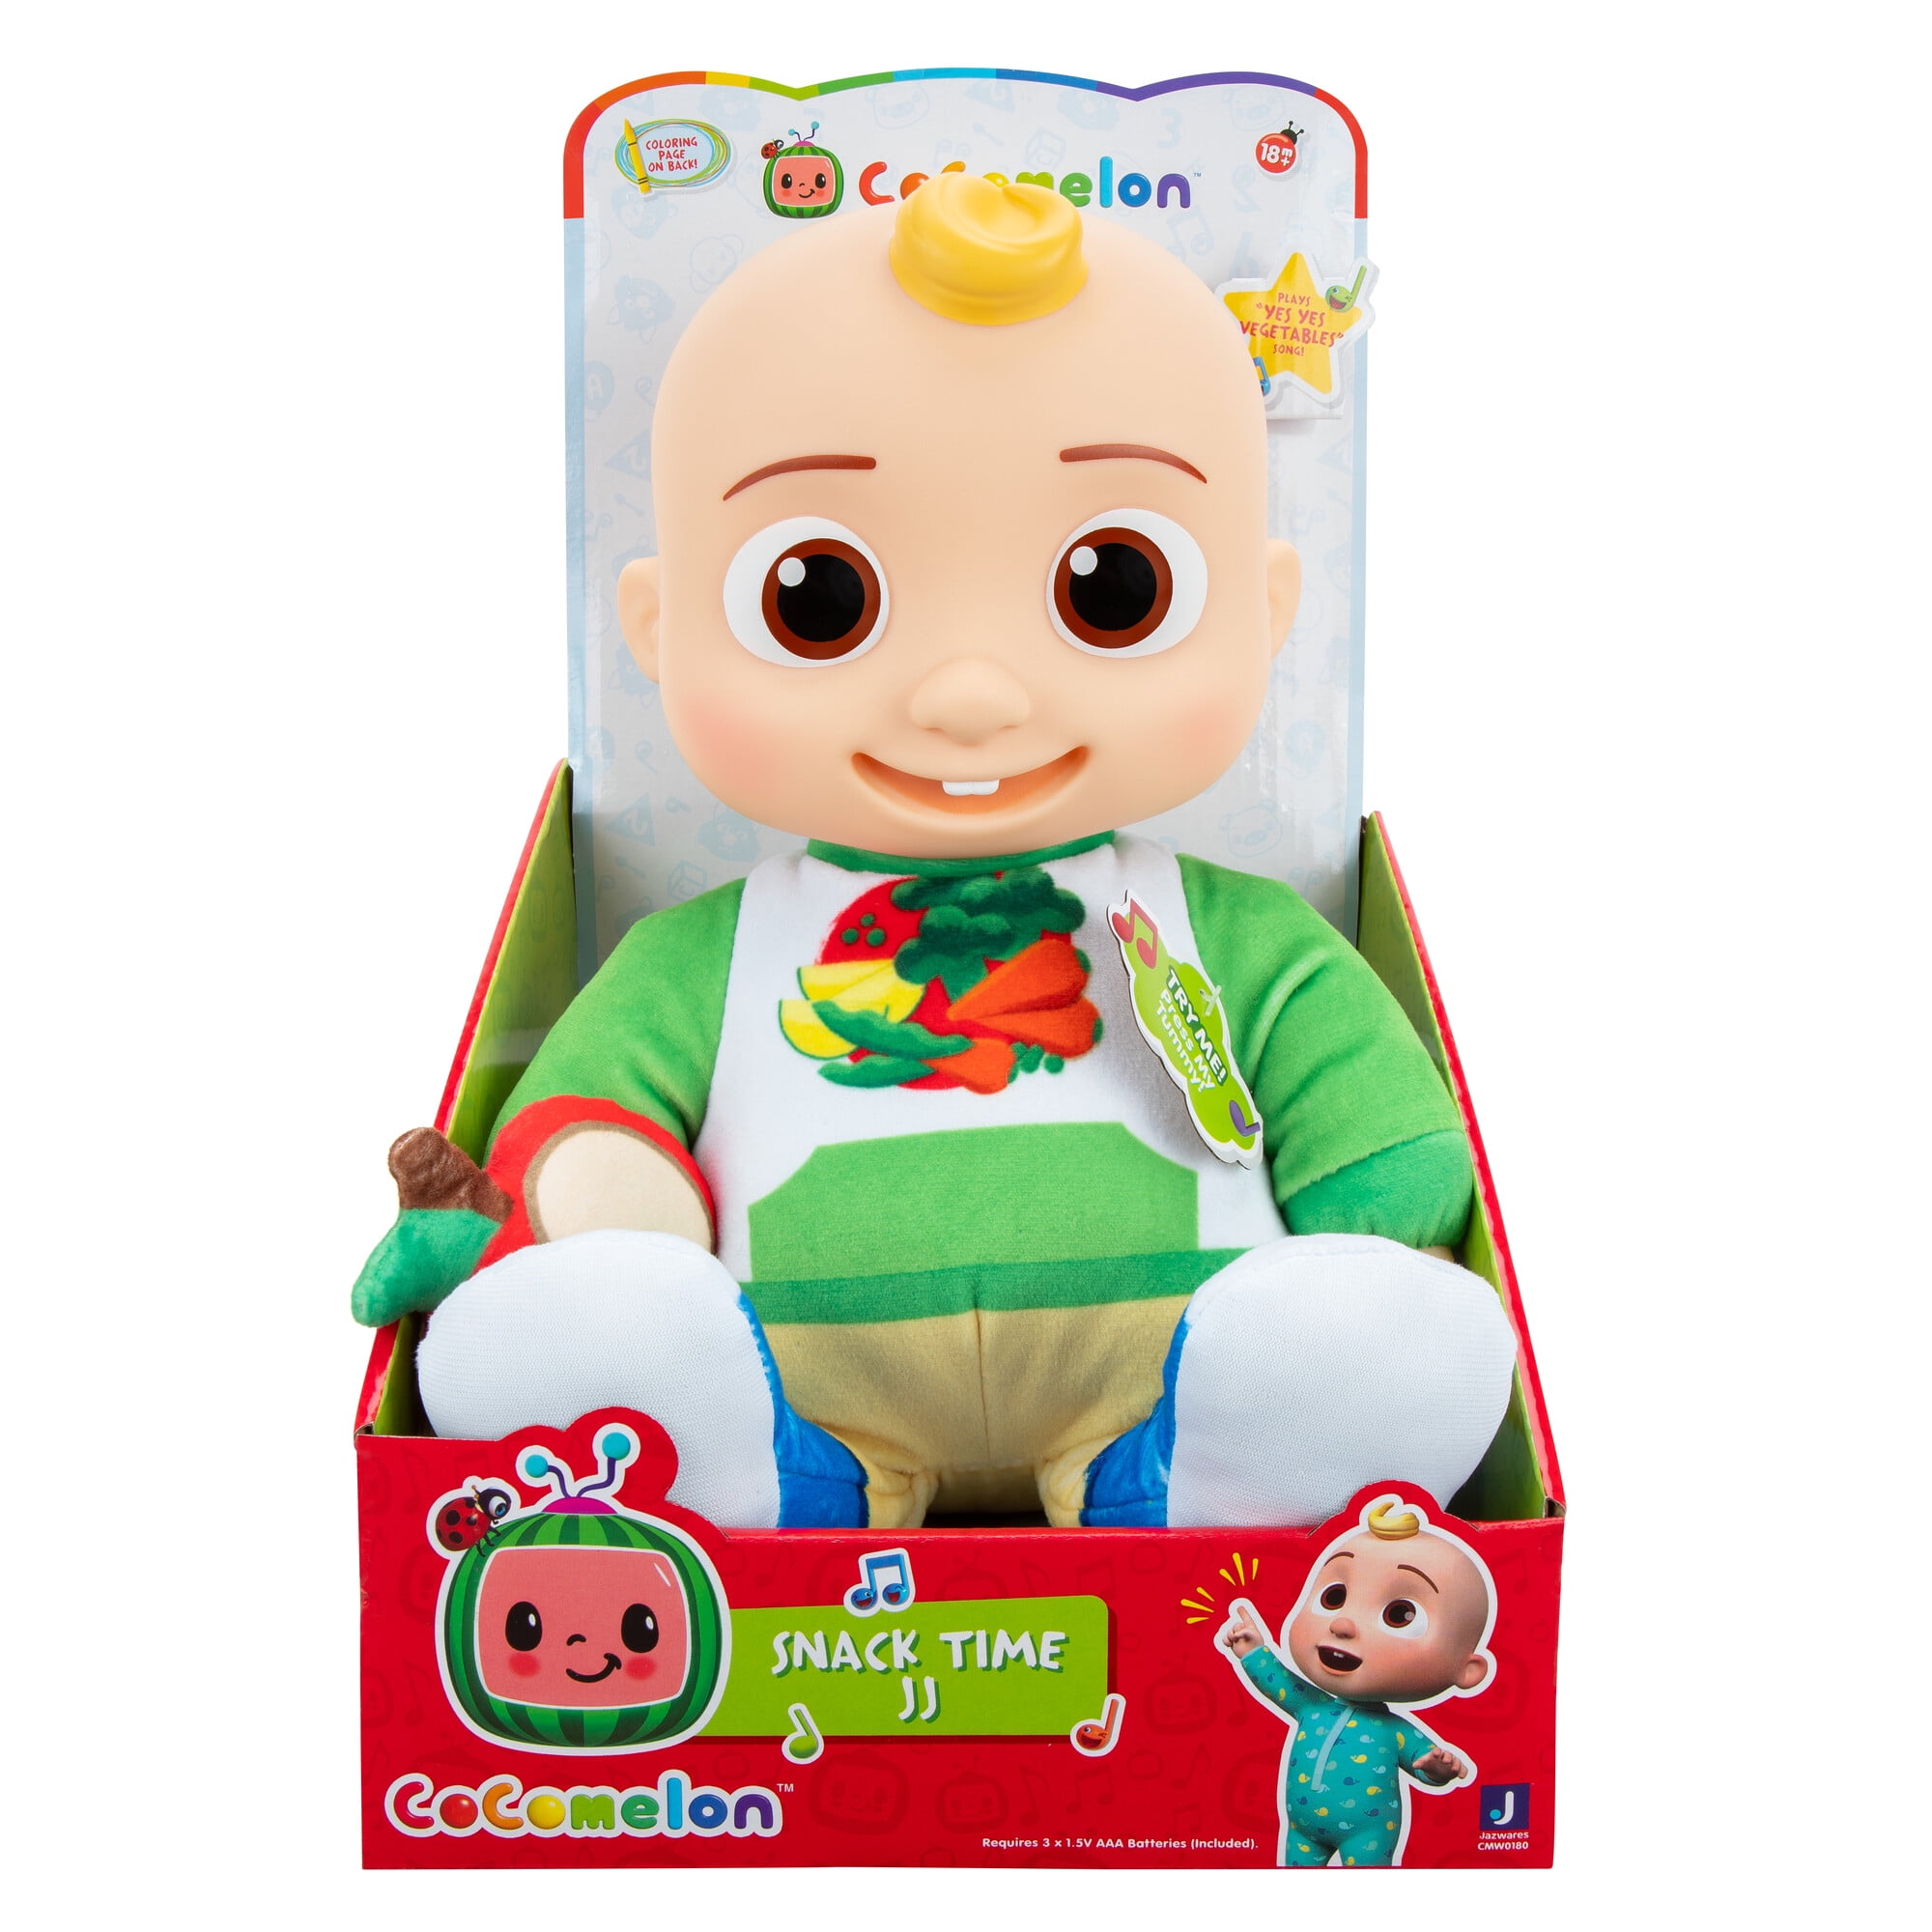 Jazwares Cocomelon Baby & Toddler JJ 8 Inch Plush Plastic Head Doll Set of 2 for sale online 